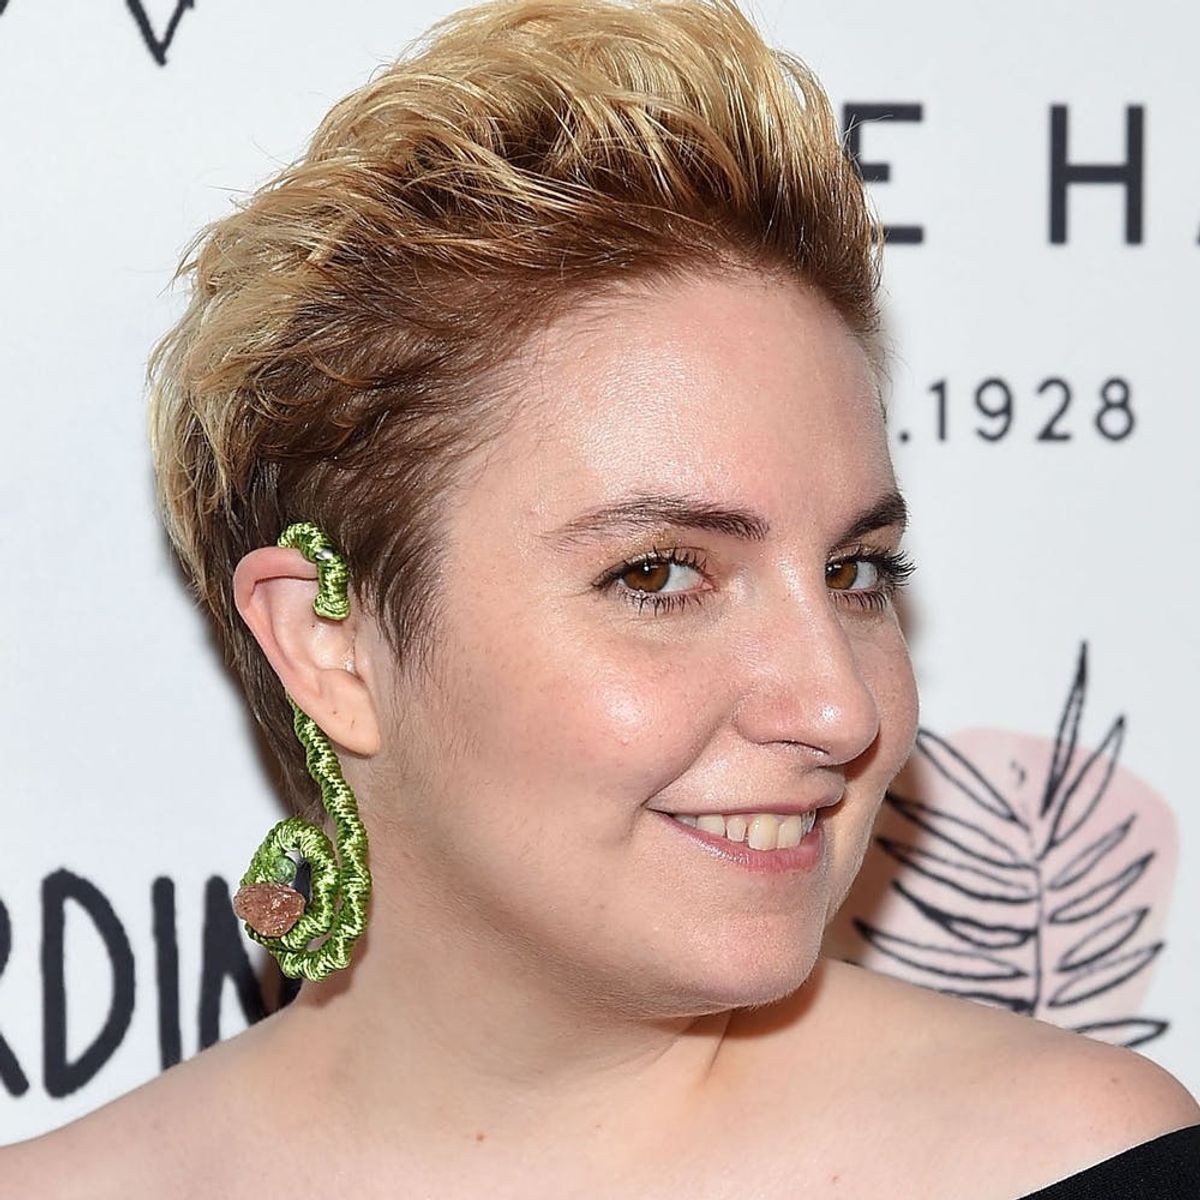 Lena Dunham’s Mom Thinks She Could Be the Mystery Woman Who Bit Beyoncé